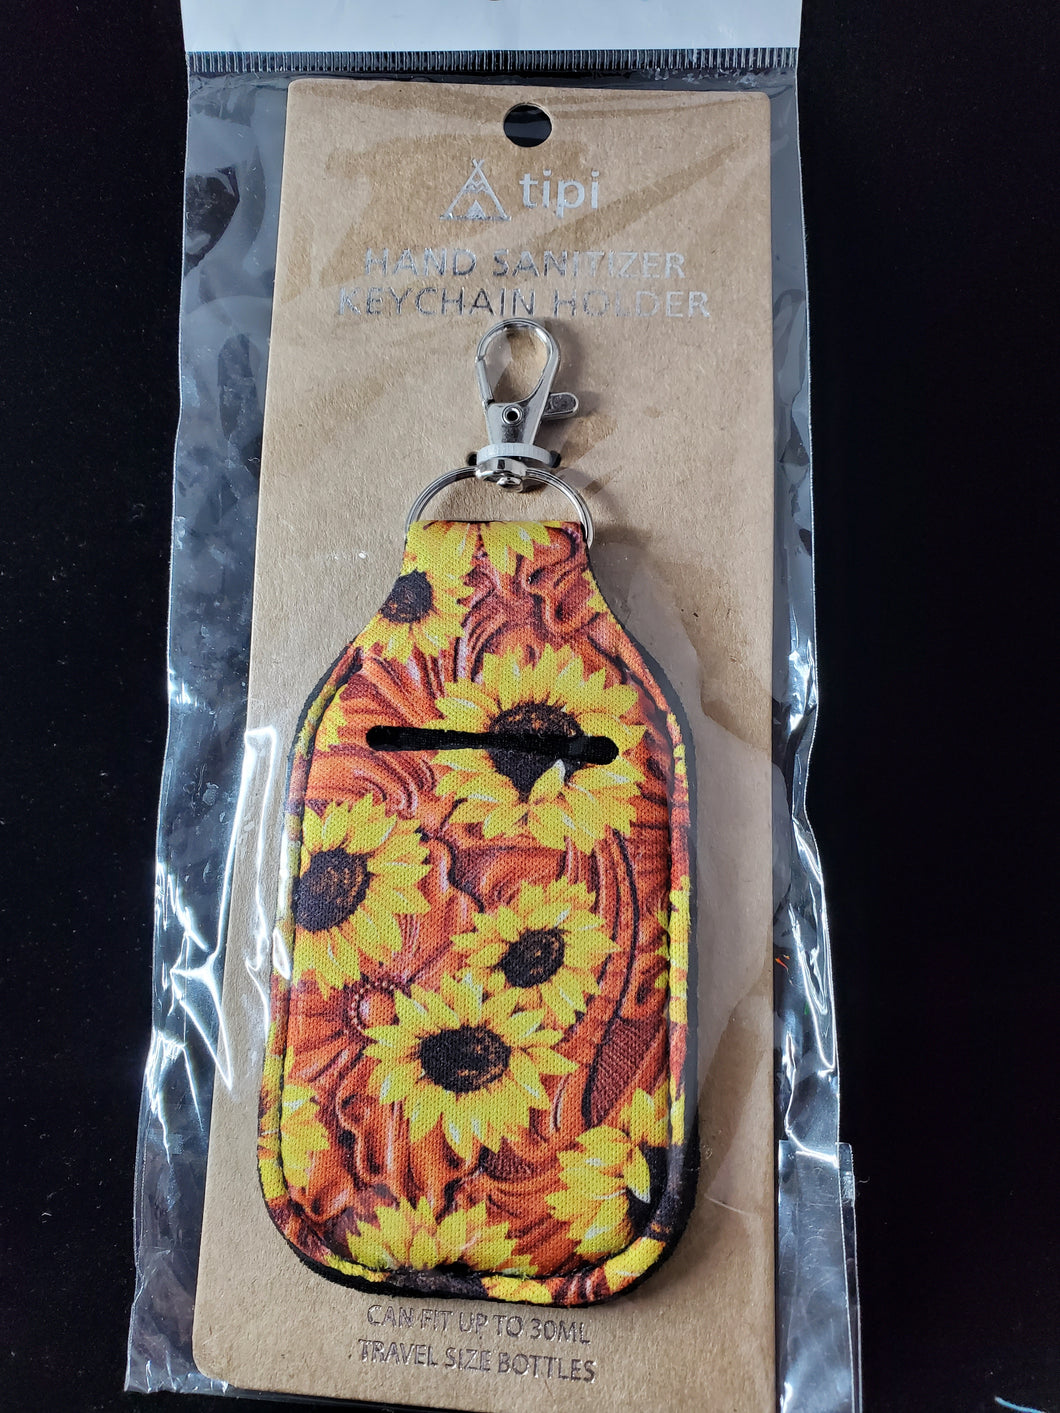 Hand Sanitizer Keychain - Unique Inspirations by Tracy and Anna